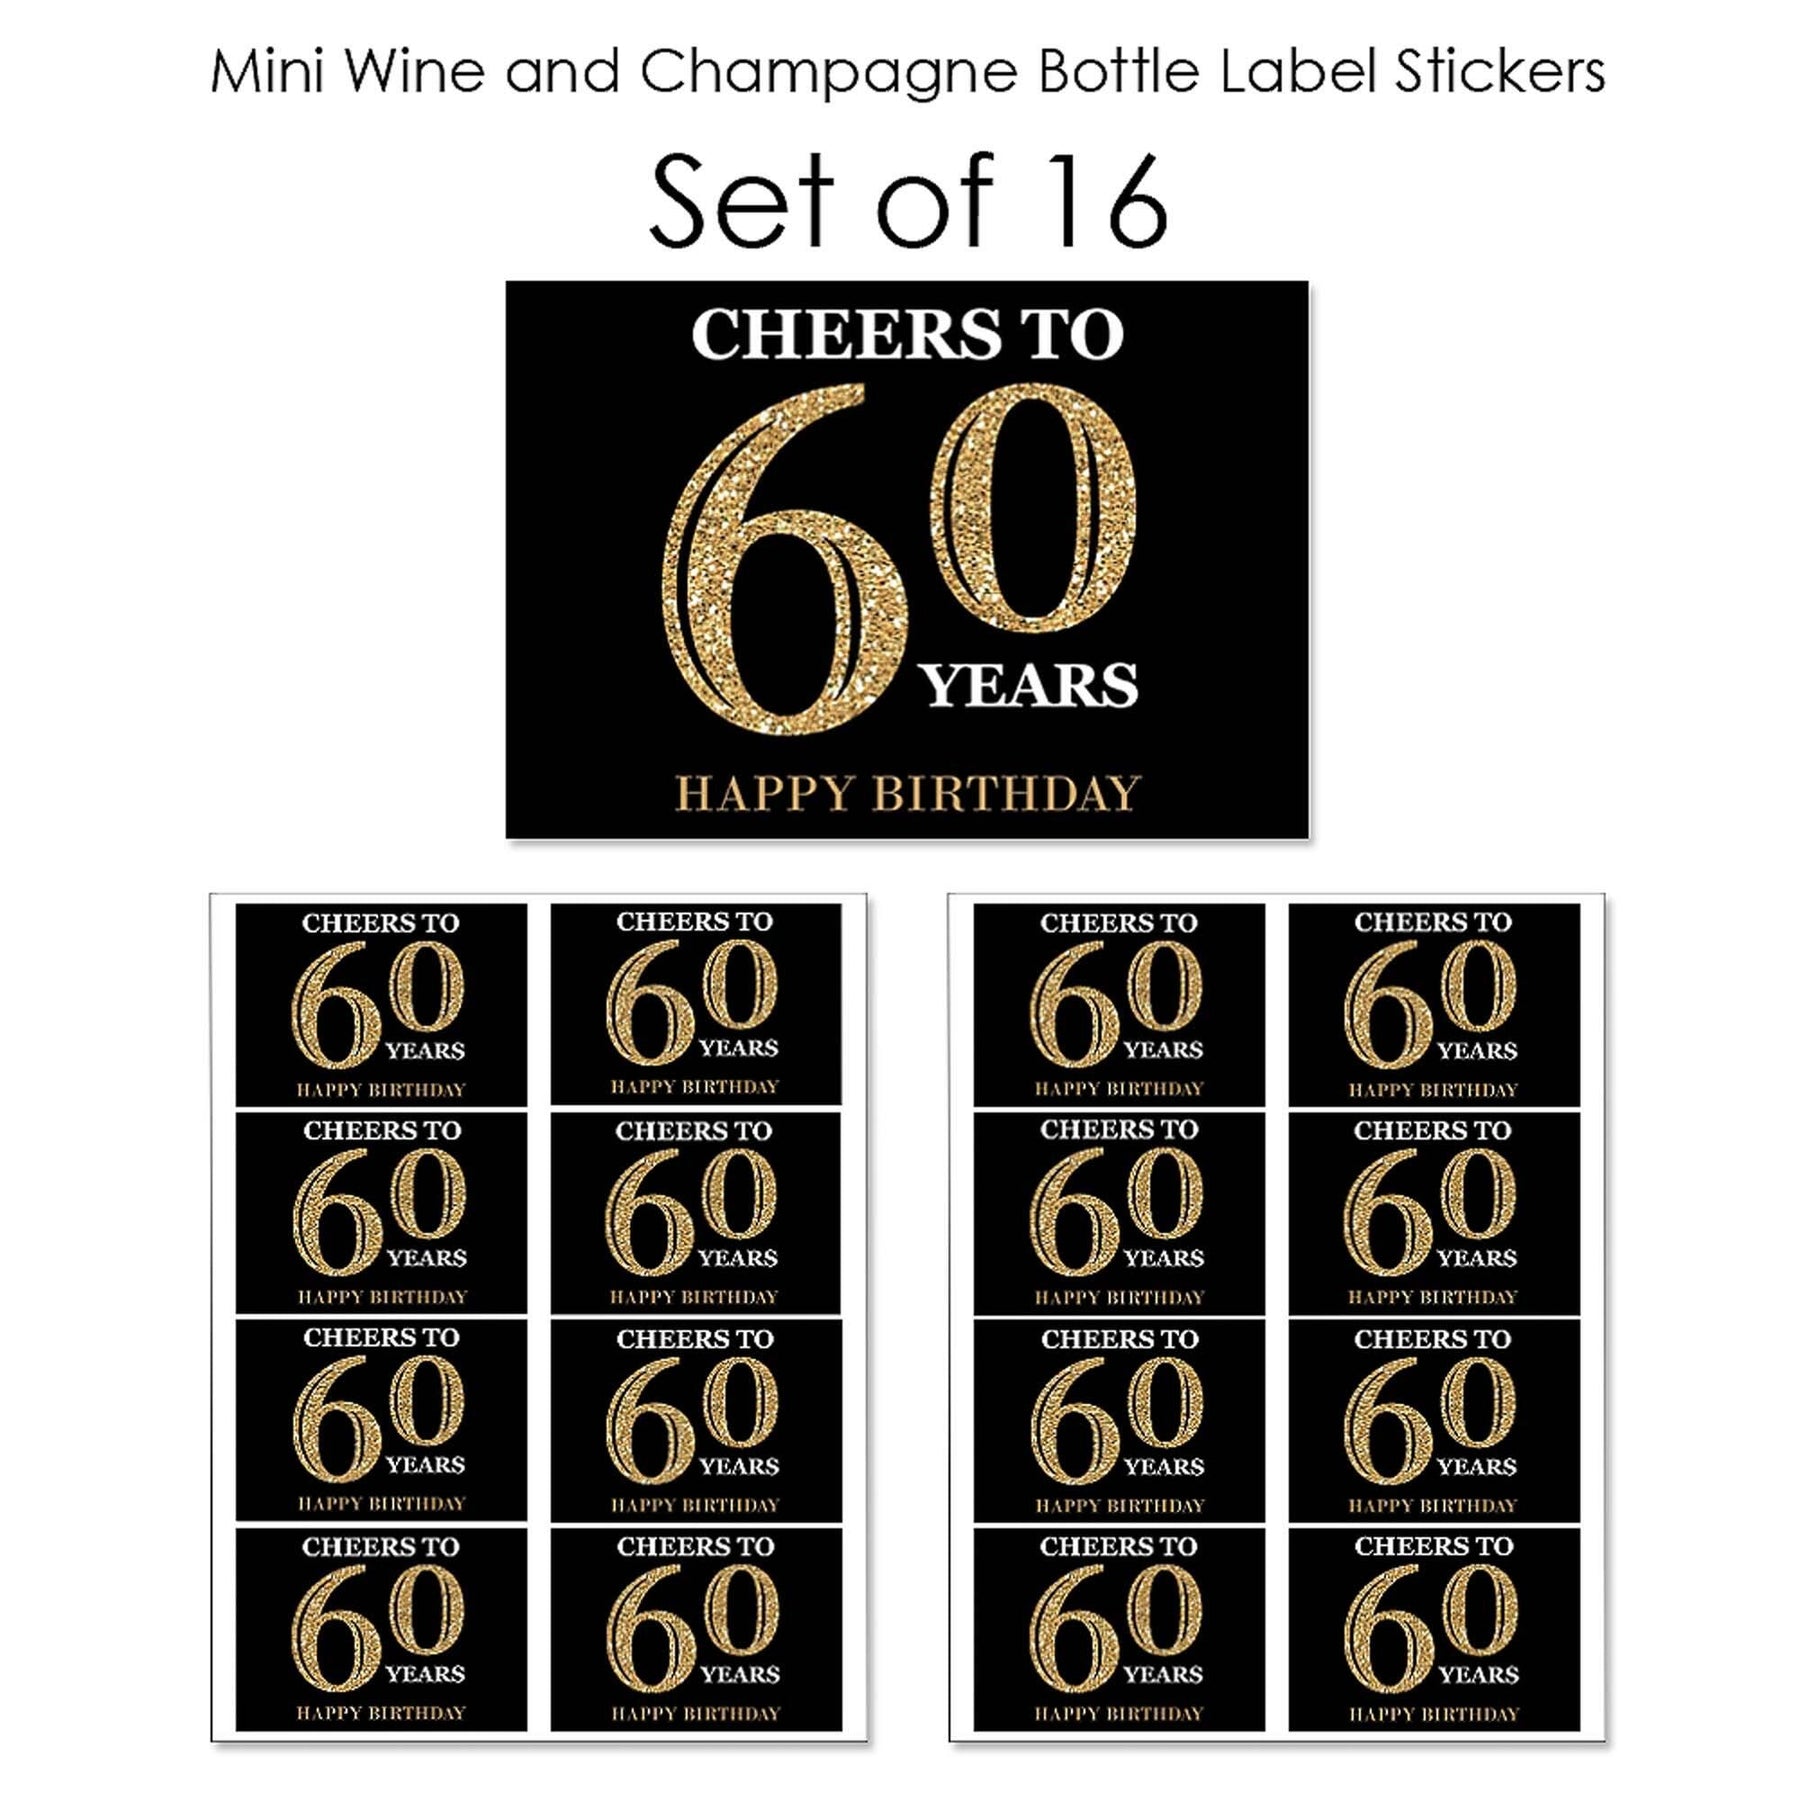 Big Dot of Happiness - Happy Retirement - Mini Wine and Champagne Bottle Label Stickers - Retirement Party Favor Gift for Women and Men - Set of 16